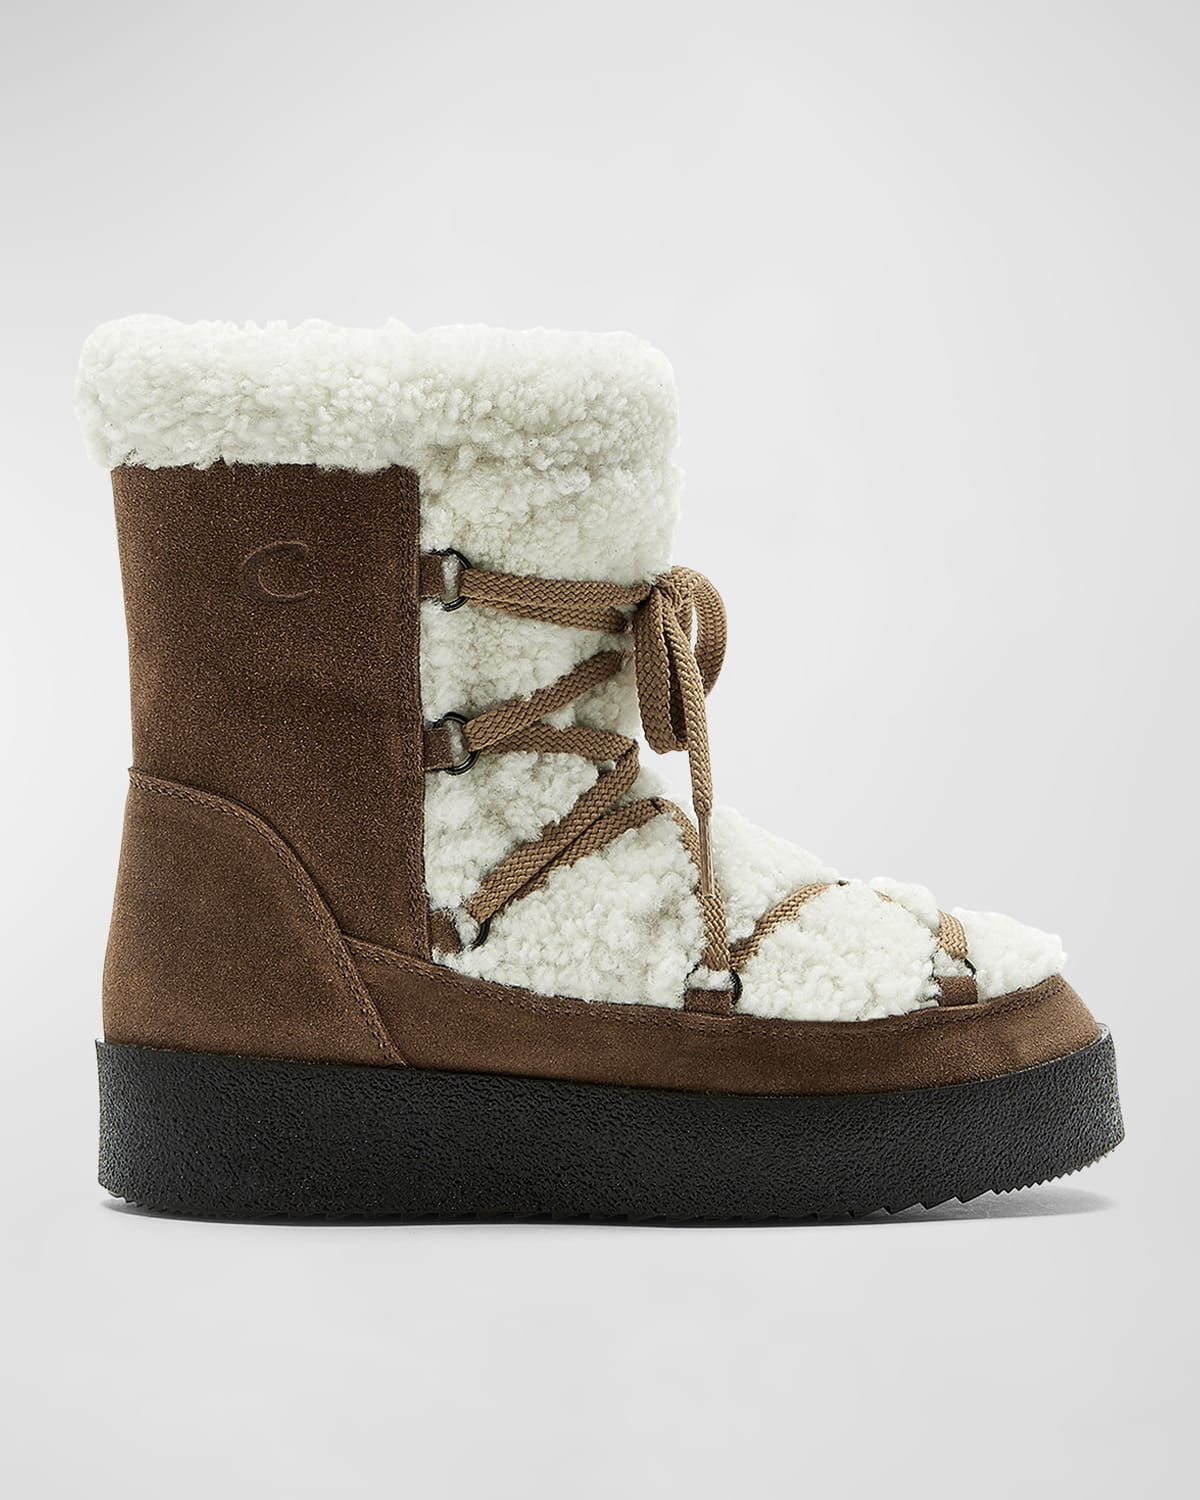 Eloise Suede Shearling Snow Boots